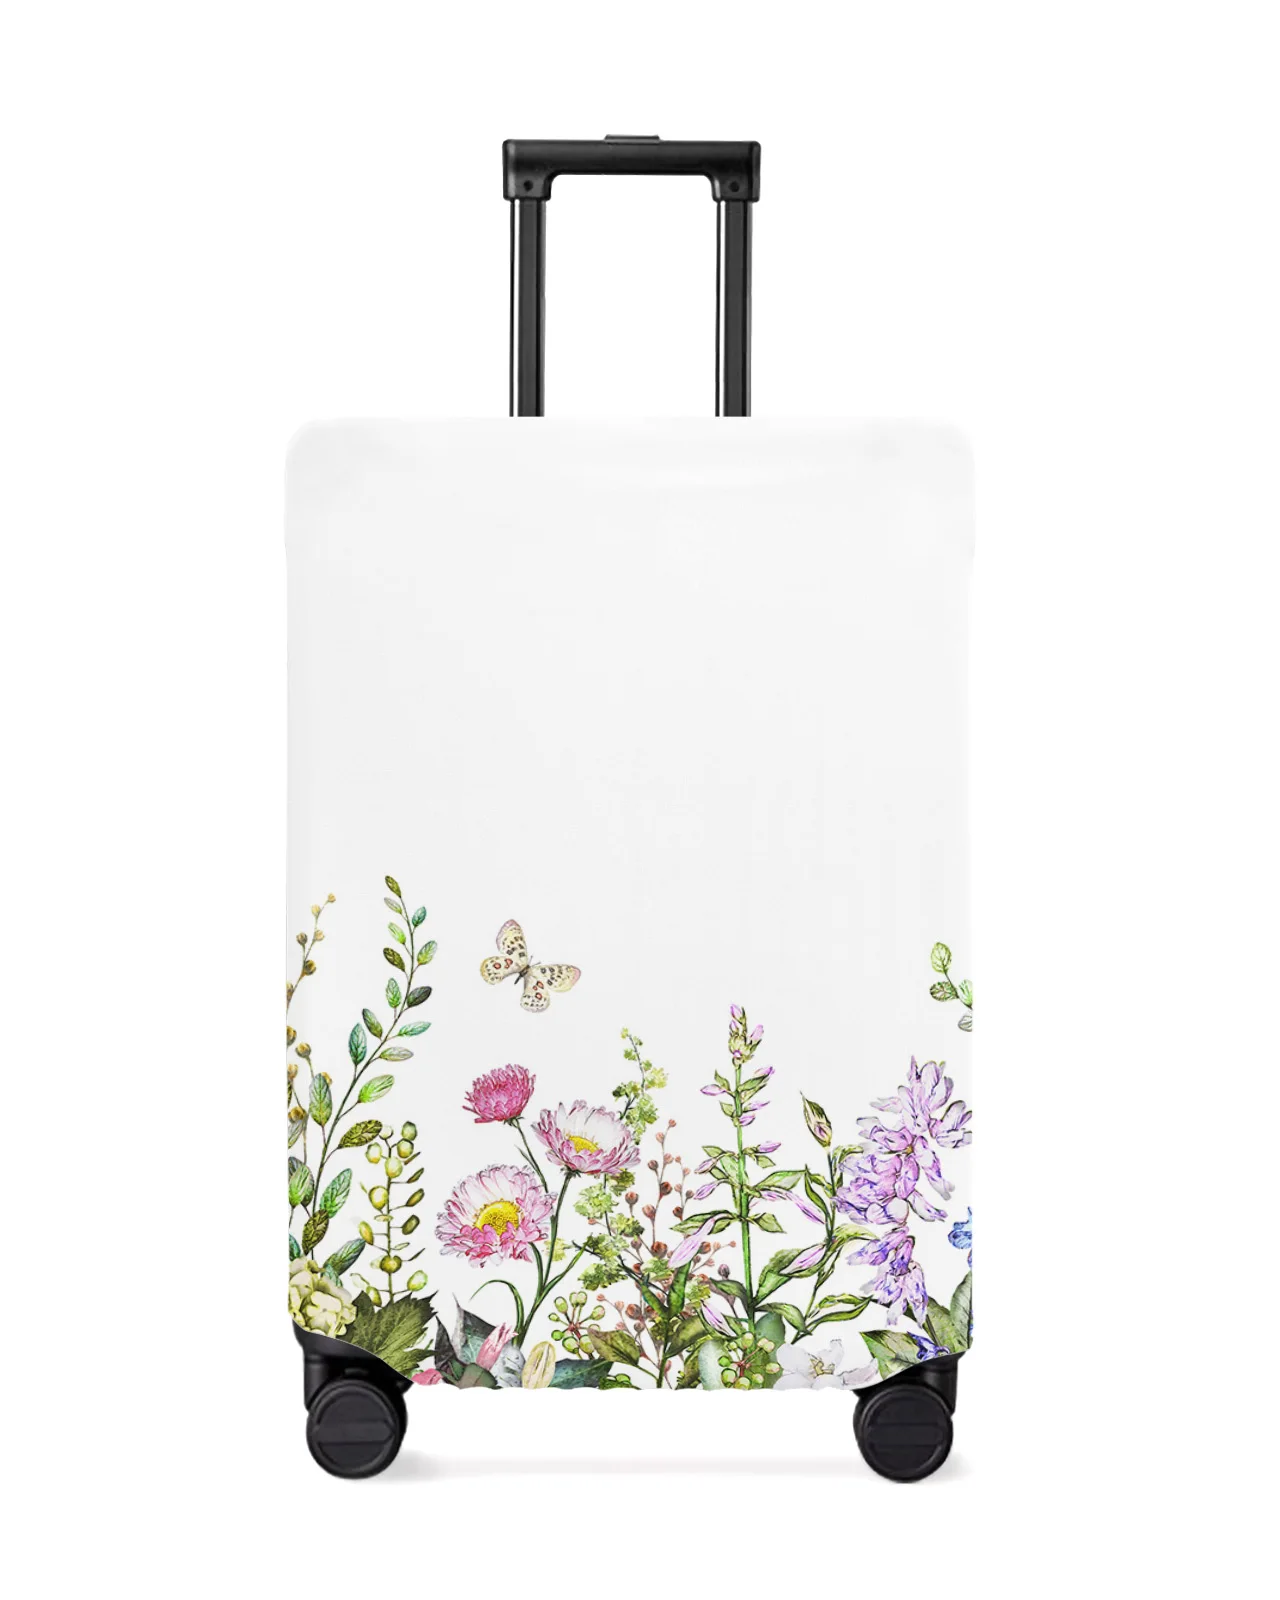 

Vintage Watercolor Flower Herb Plant Luggage Protective Cover Travel Accessories Suitcase Elastic Dust Case Protect Sleeve